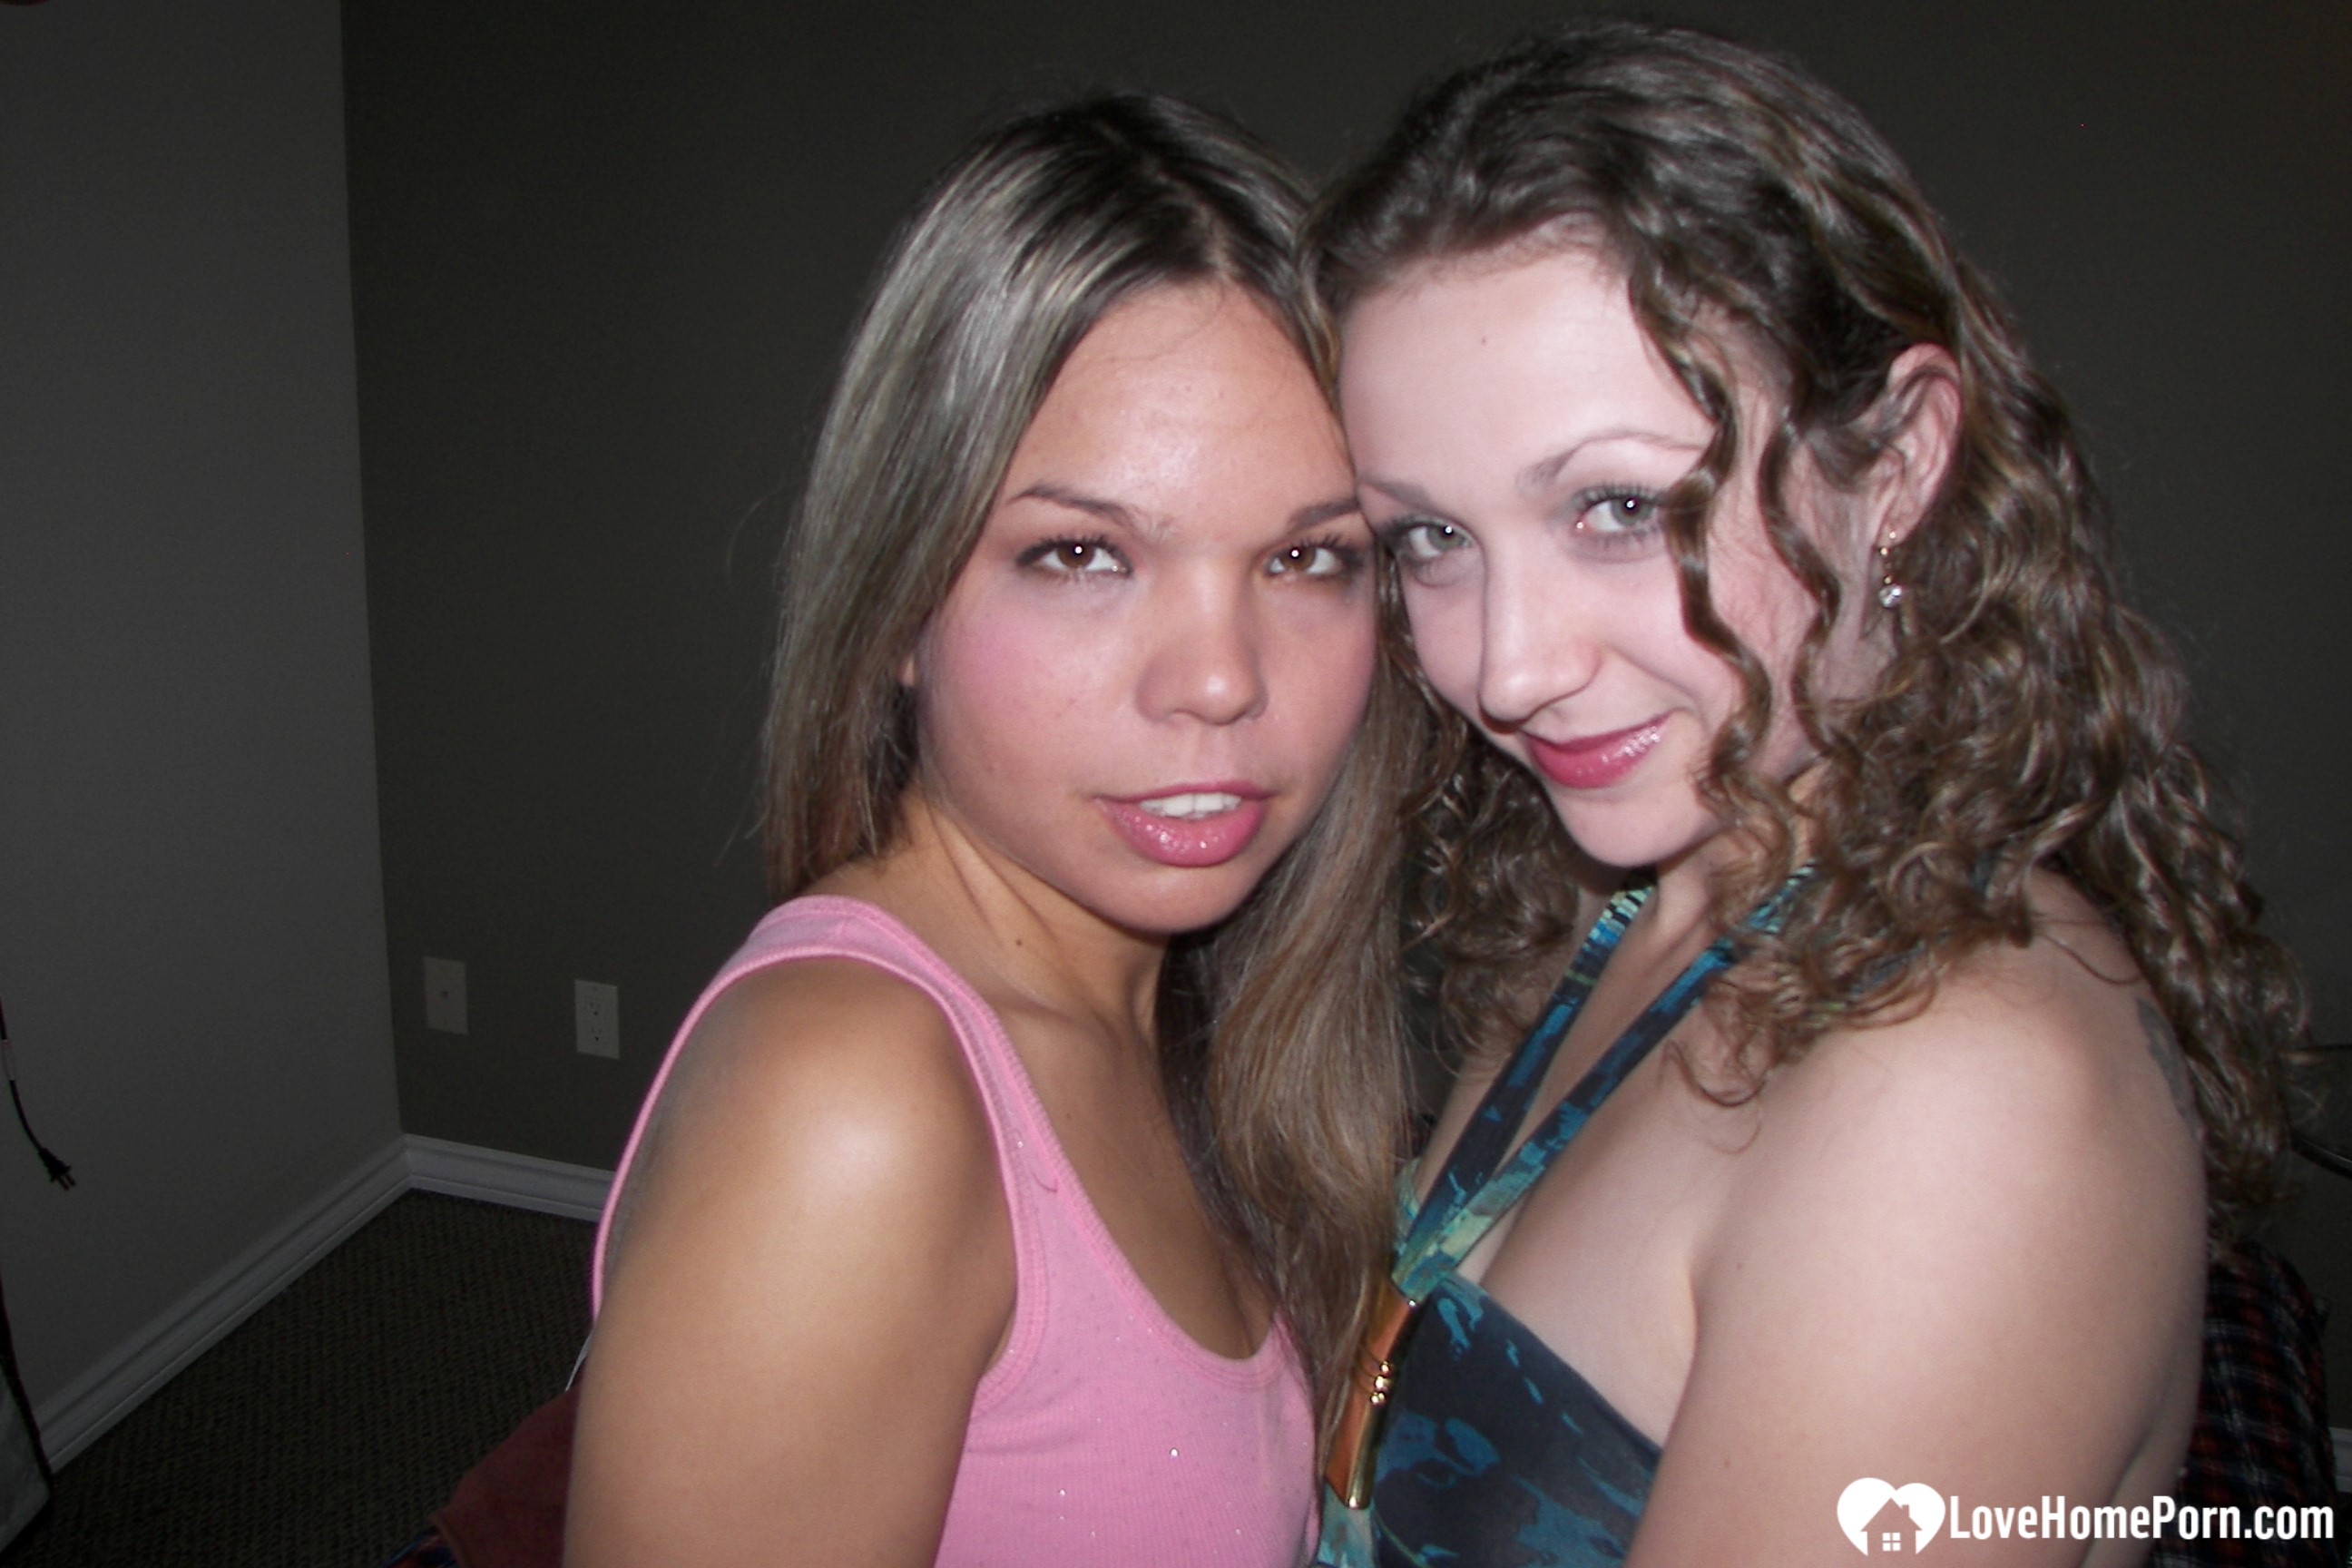 College girls get naked and experiment a bit (46 pictures)